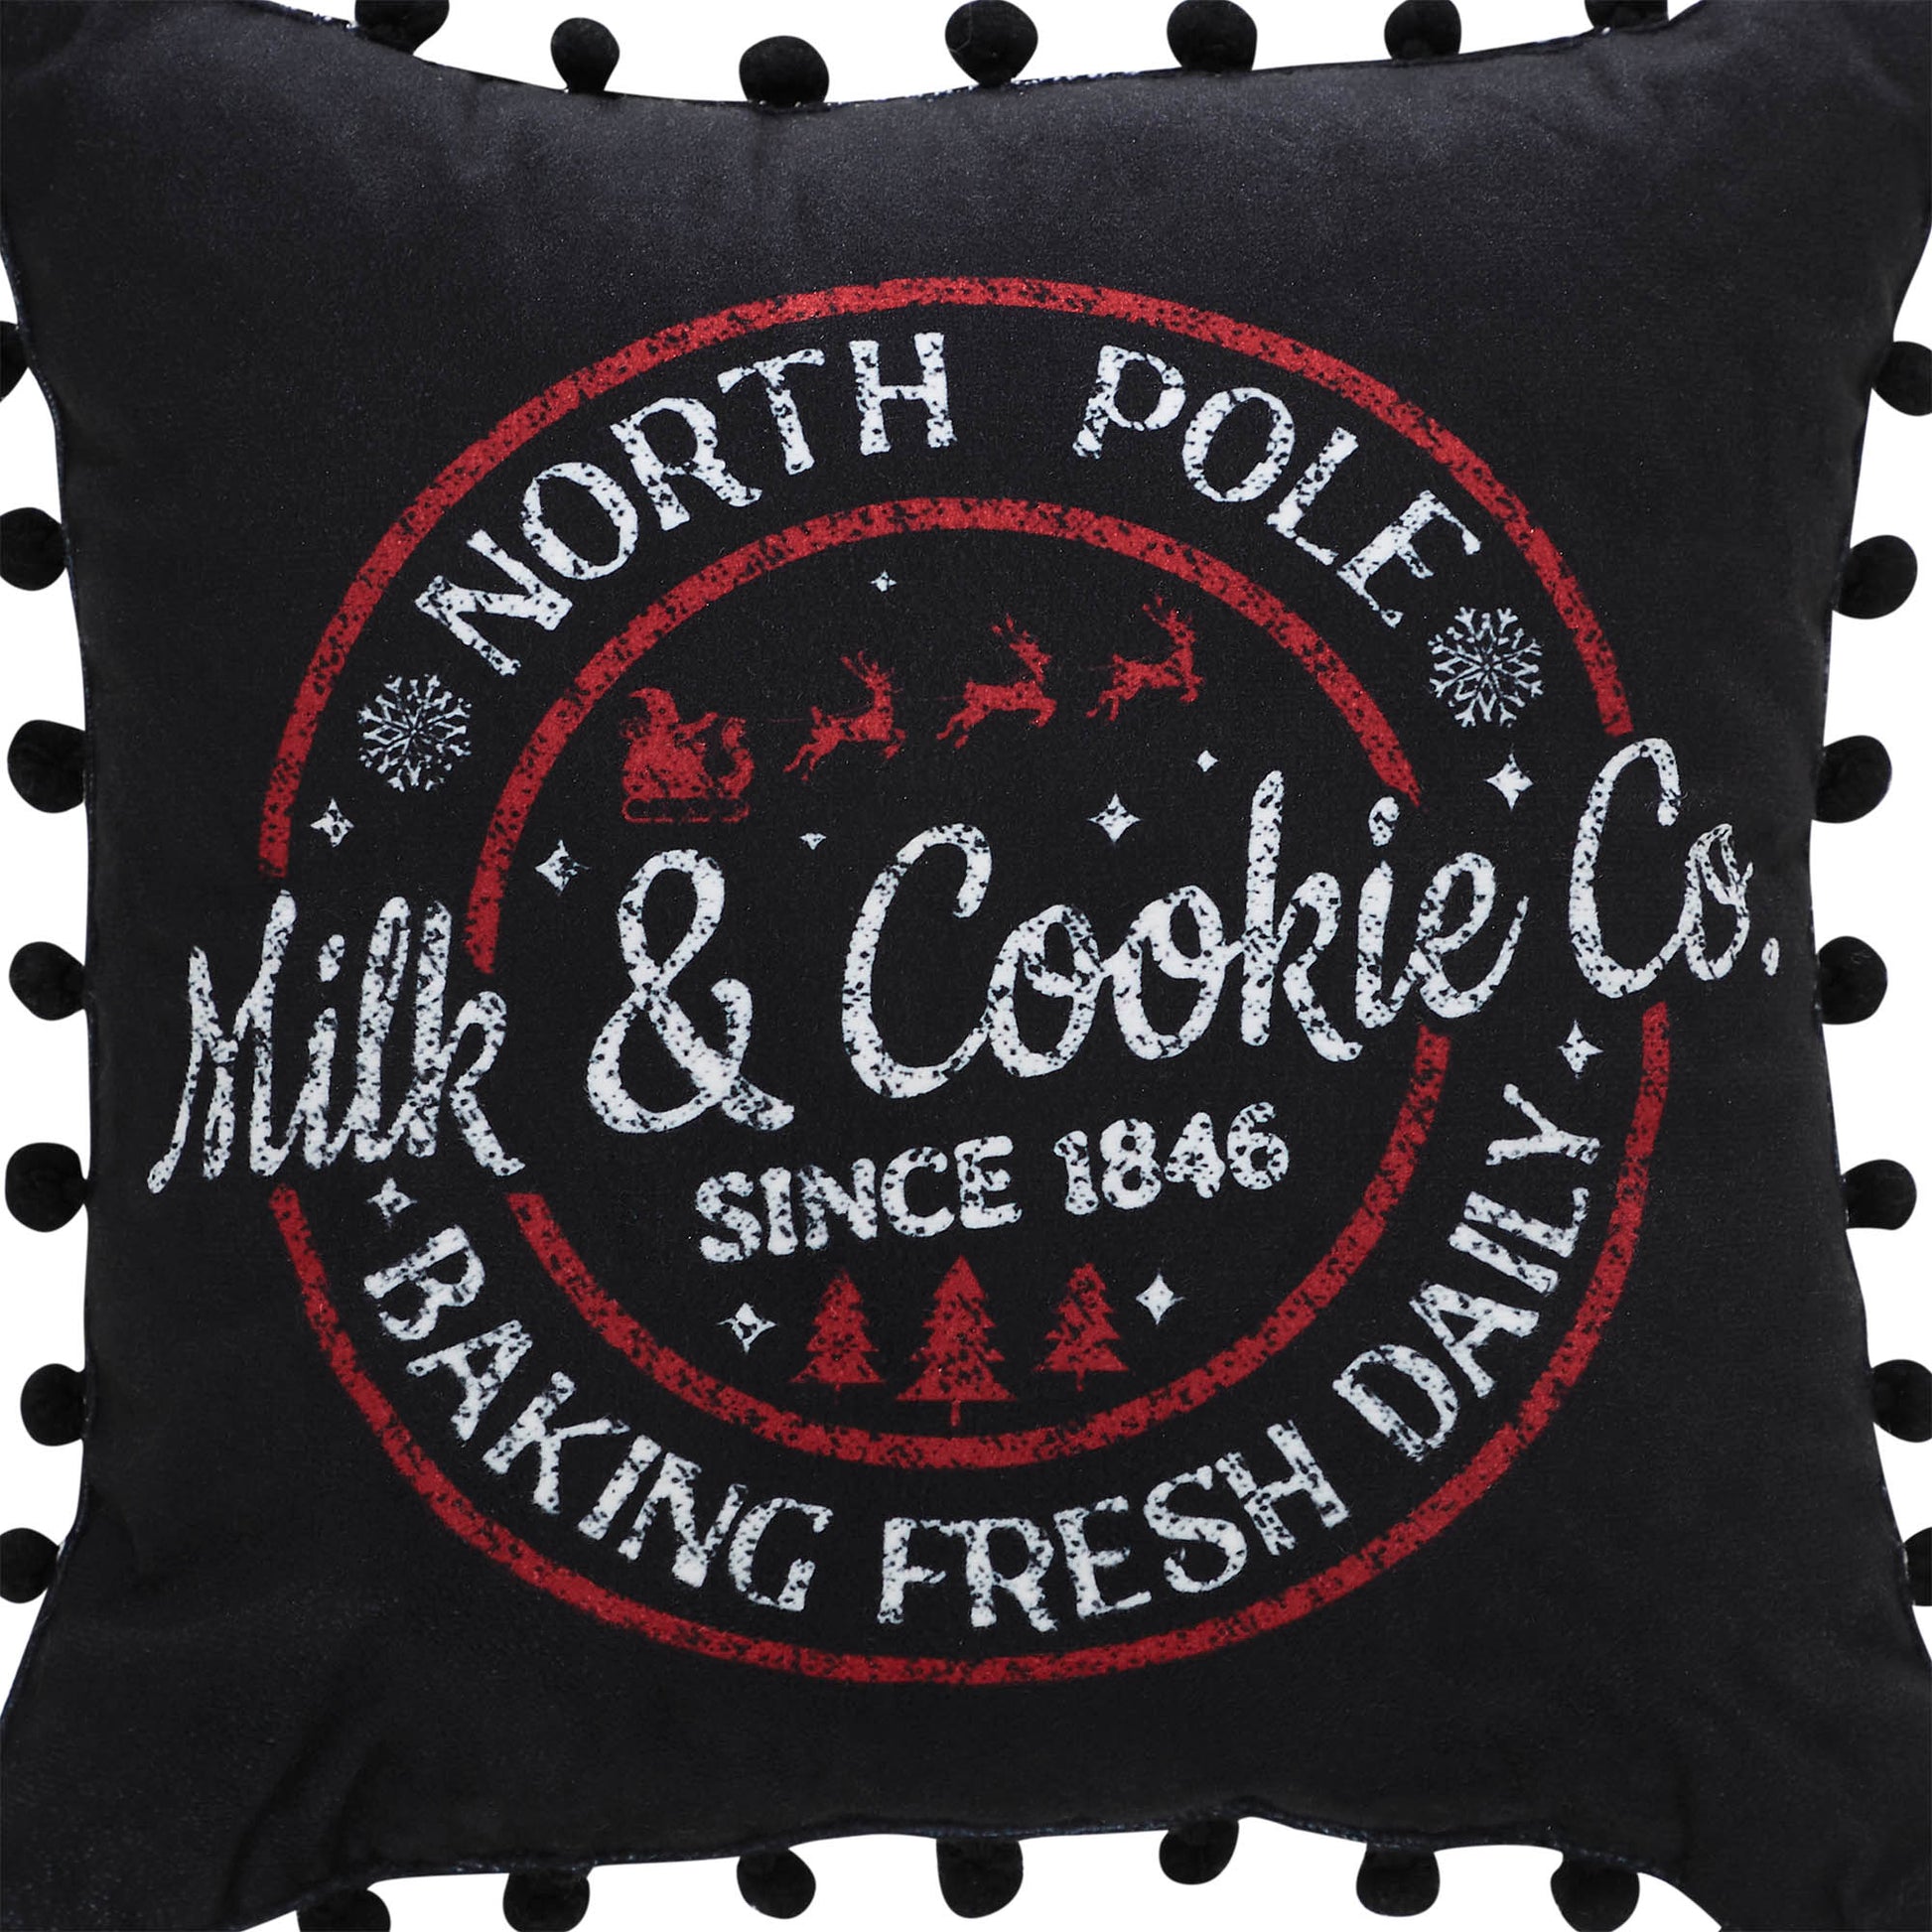 84098-Annie-Black-Check-Milk-and-Cookies-Pillow-12x12-image-6